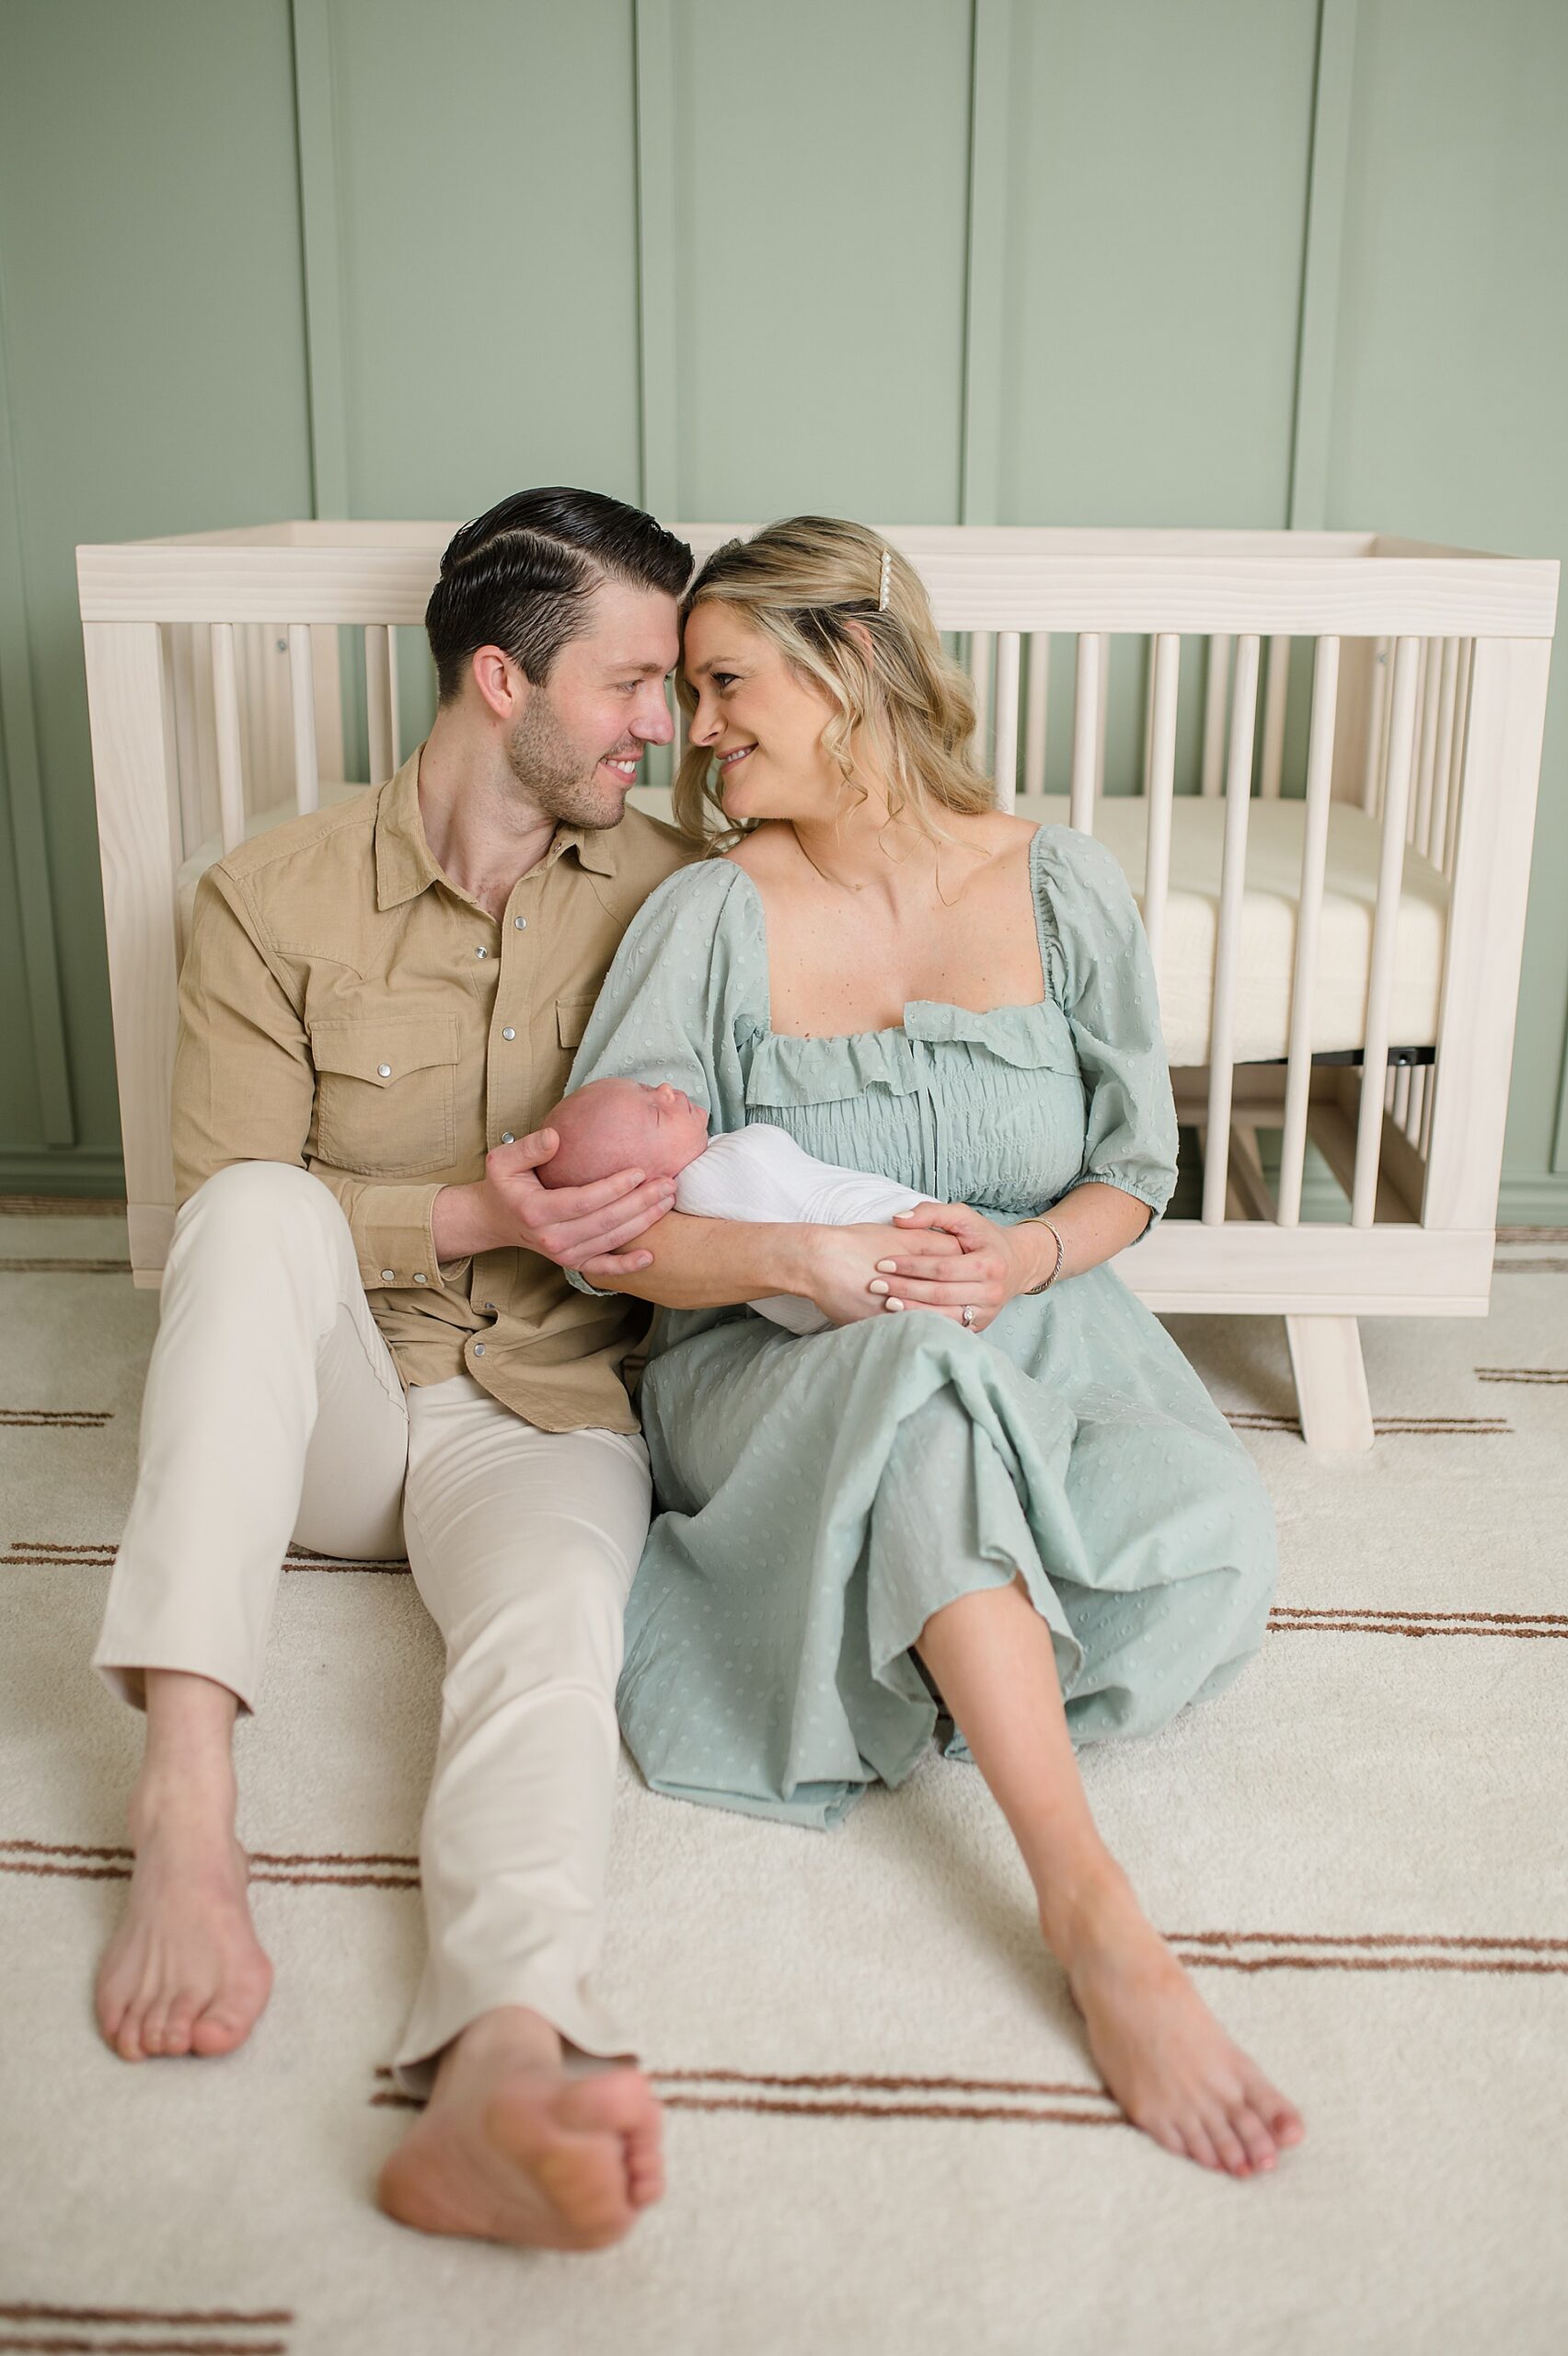 parents sit on floor of nursery during Cozy In-Home Newborn Session photographed by Lindsey Dutton Photography, a Dallas Newborn photographer
